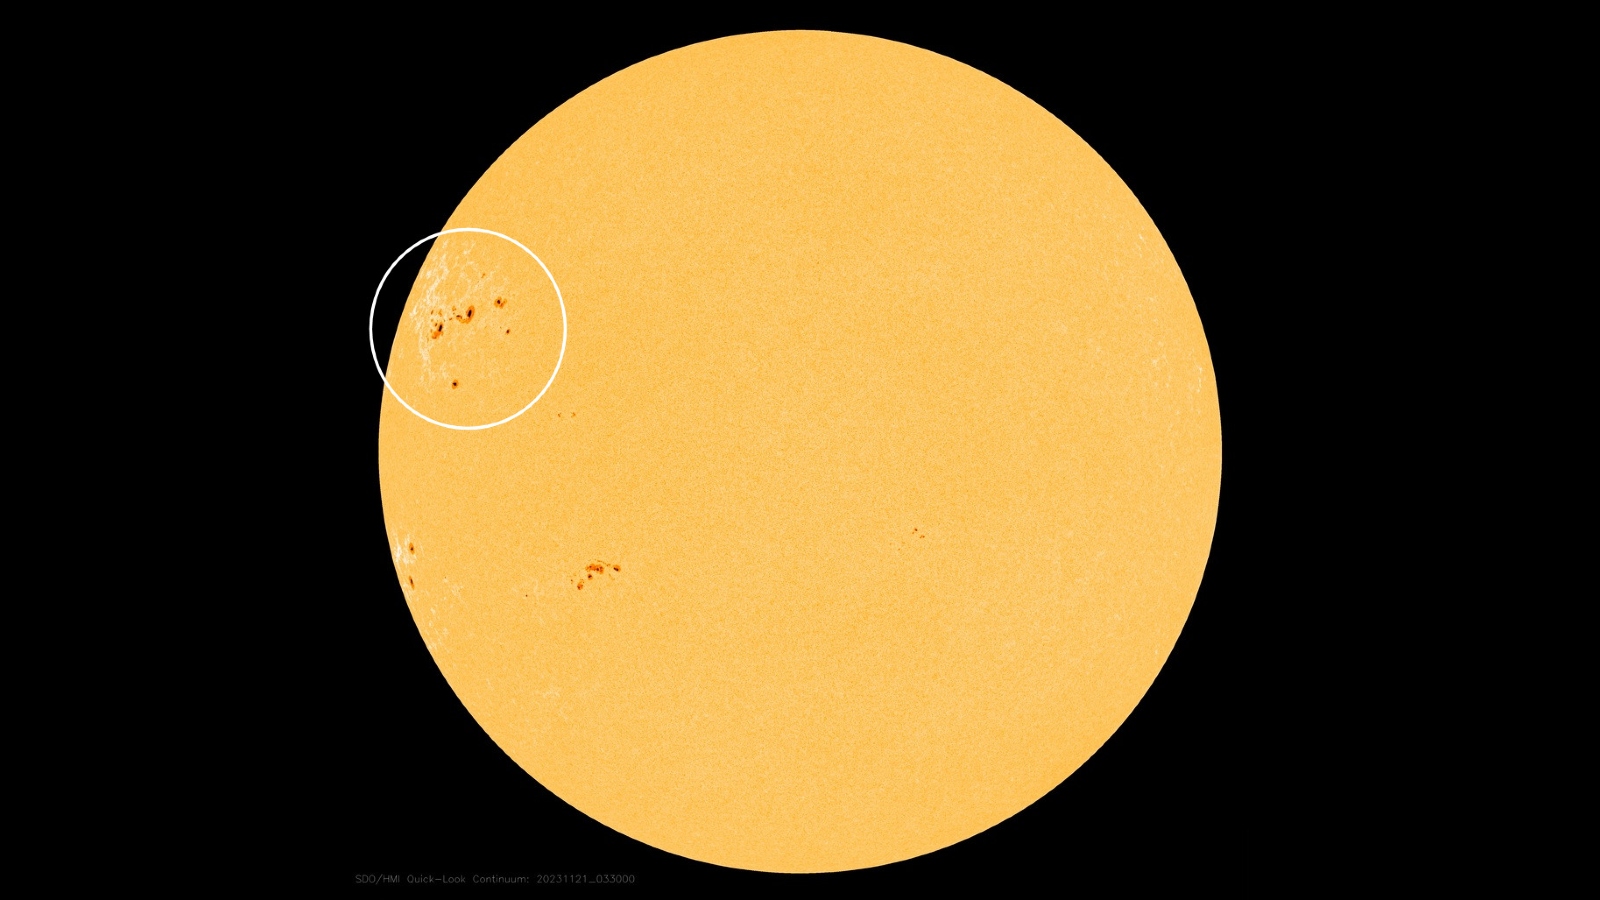 Giant spots appeared on the sun.  It is several times larger than the Earth and portends trouble